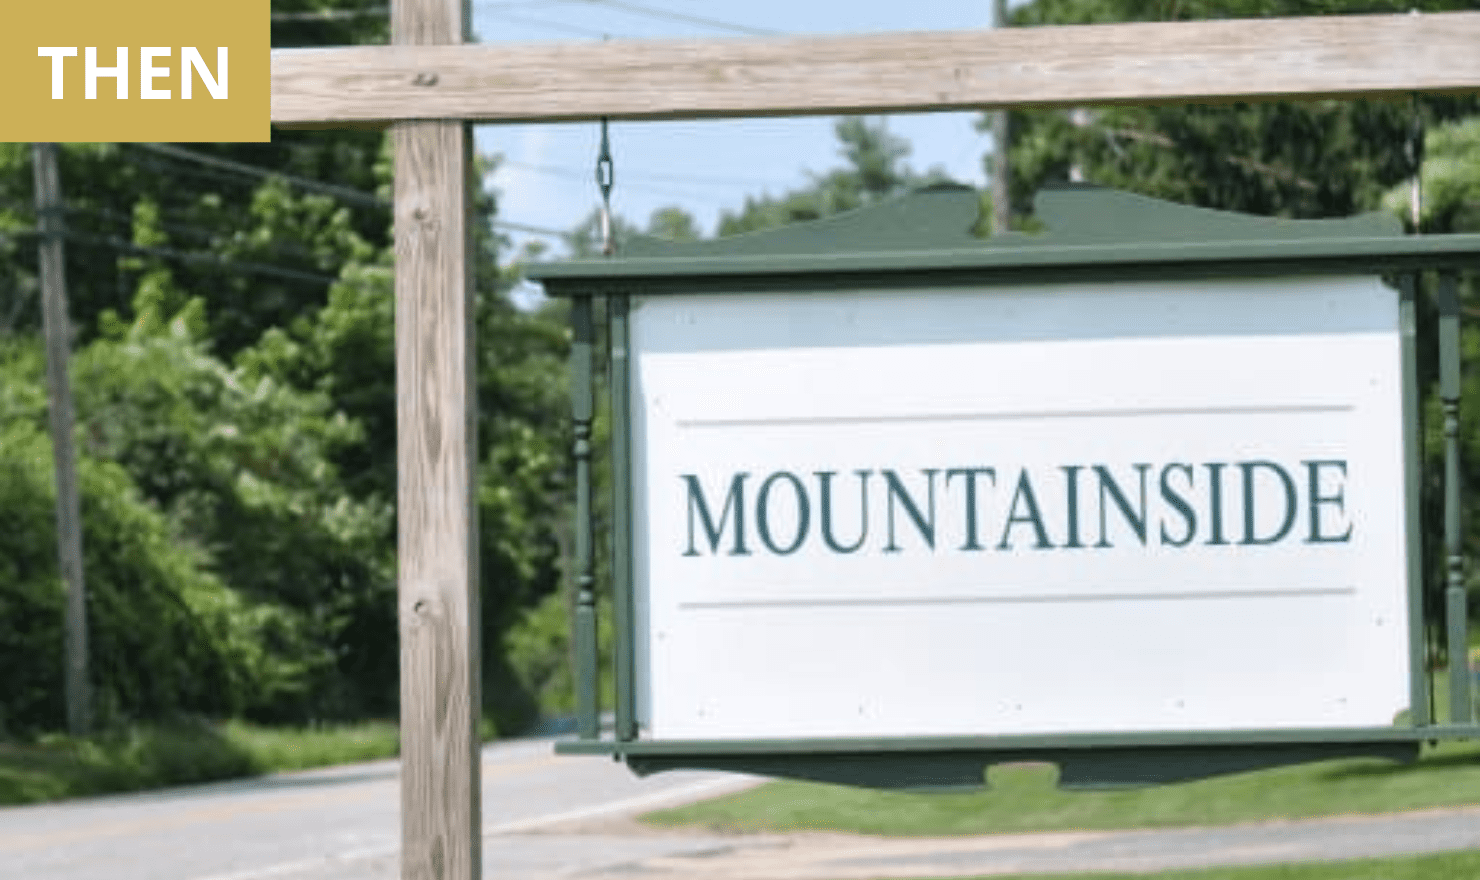 THEN: Mountainside Sign